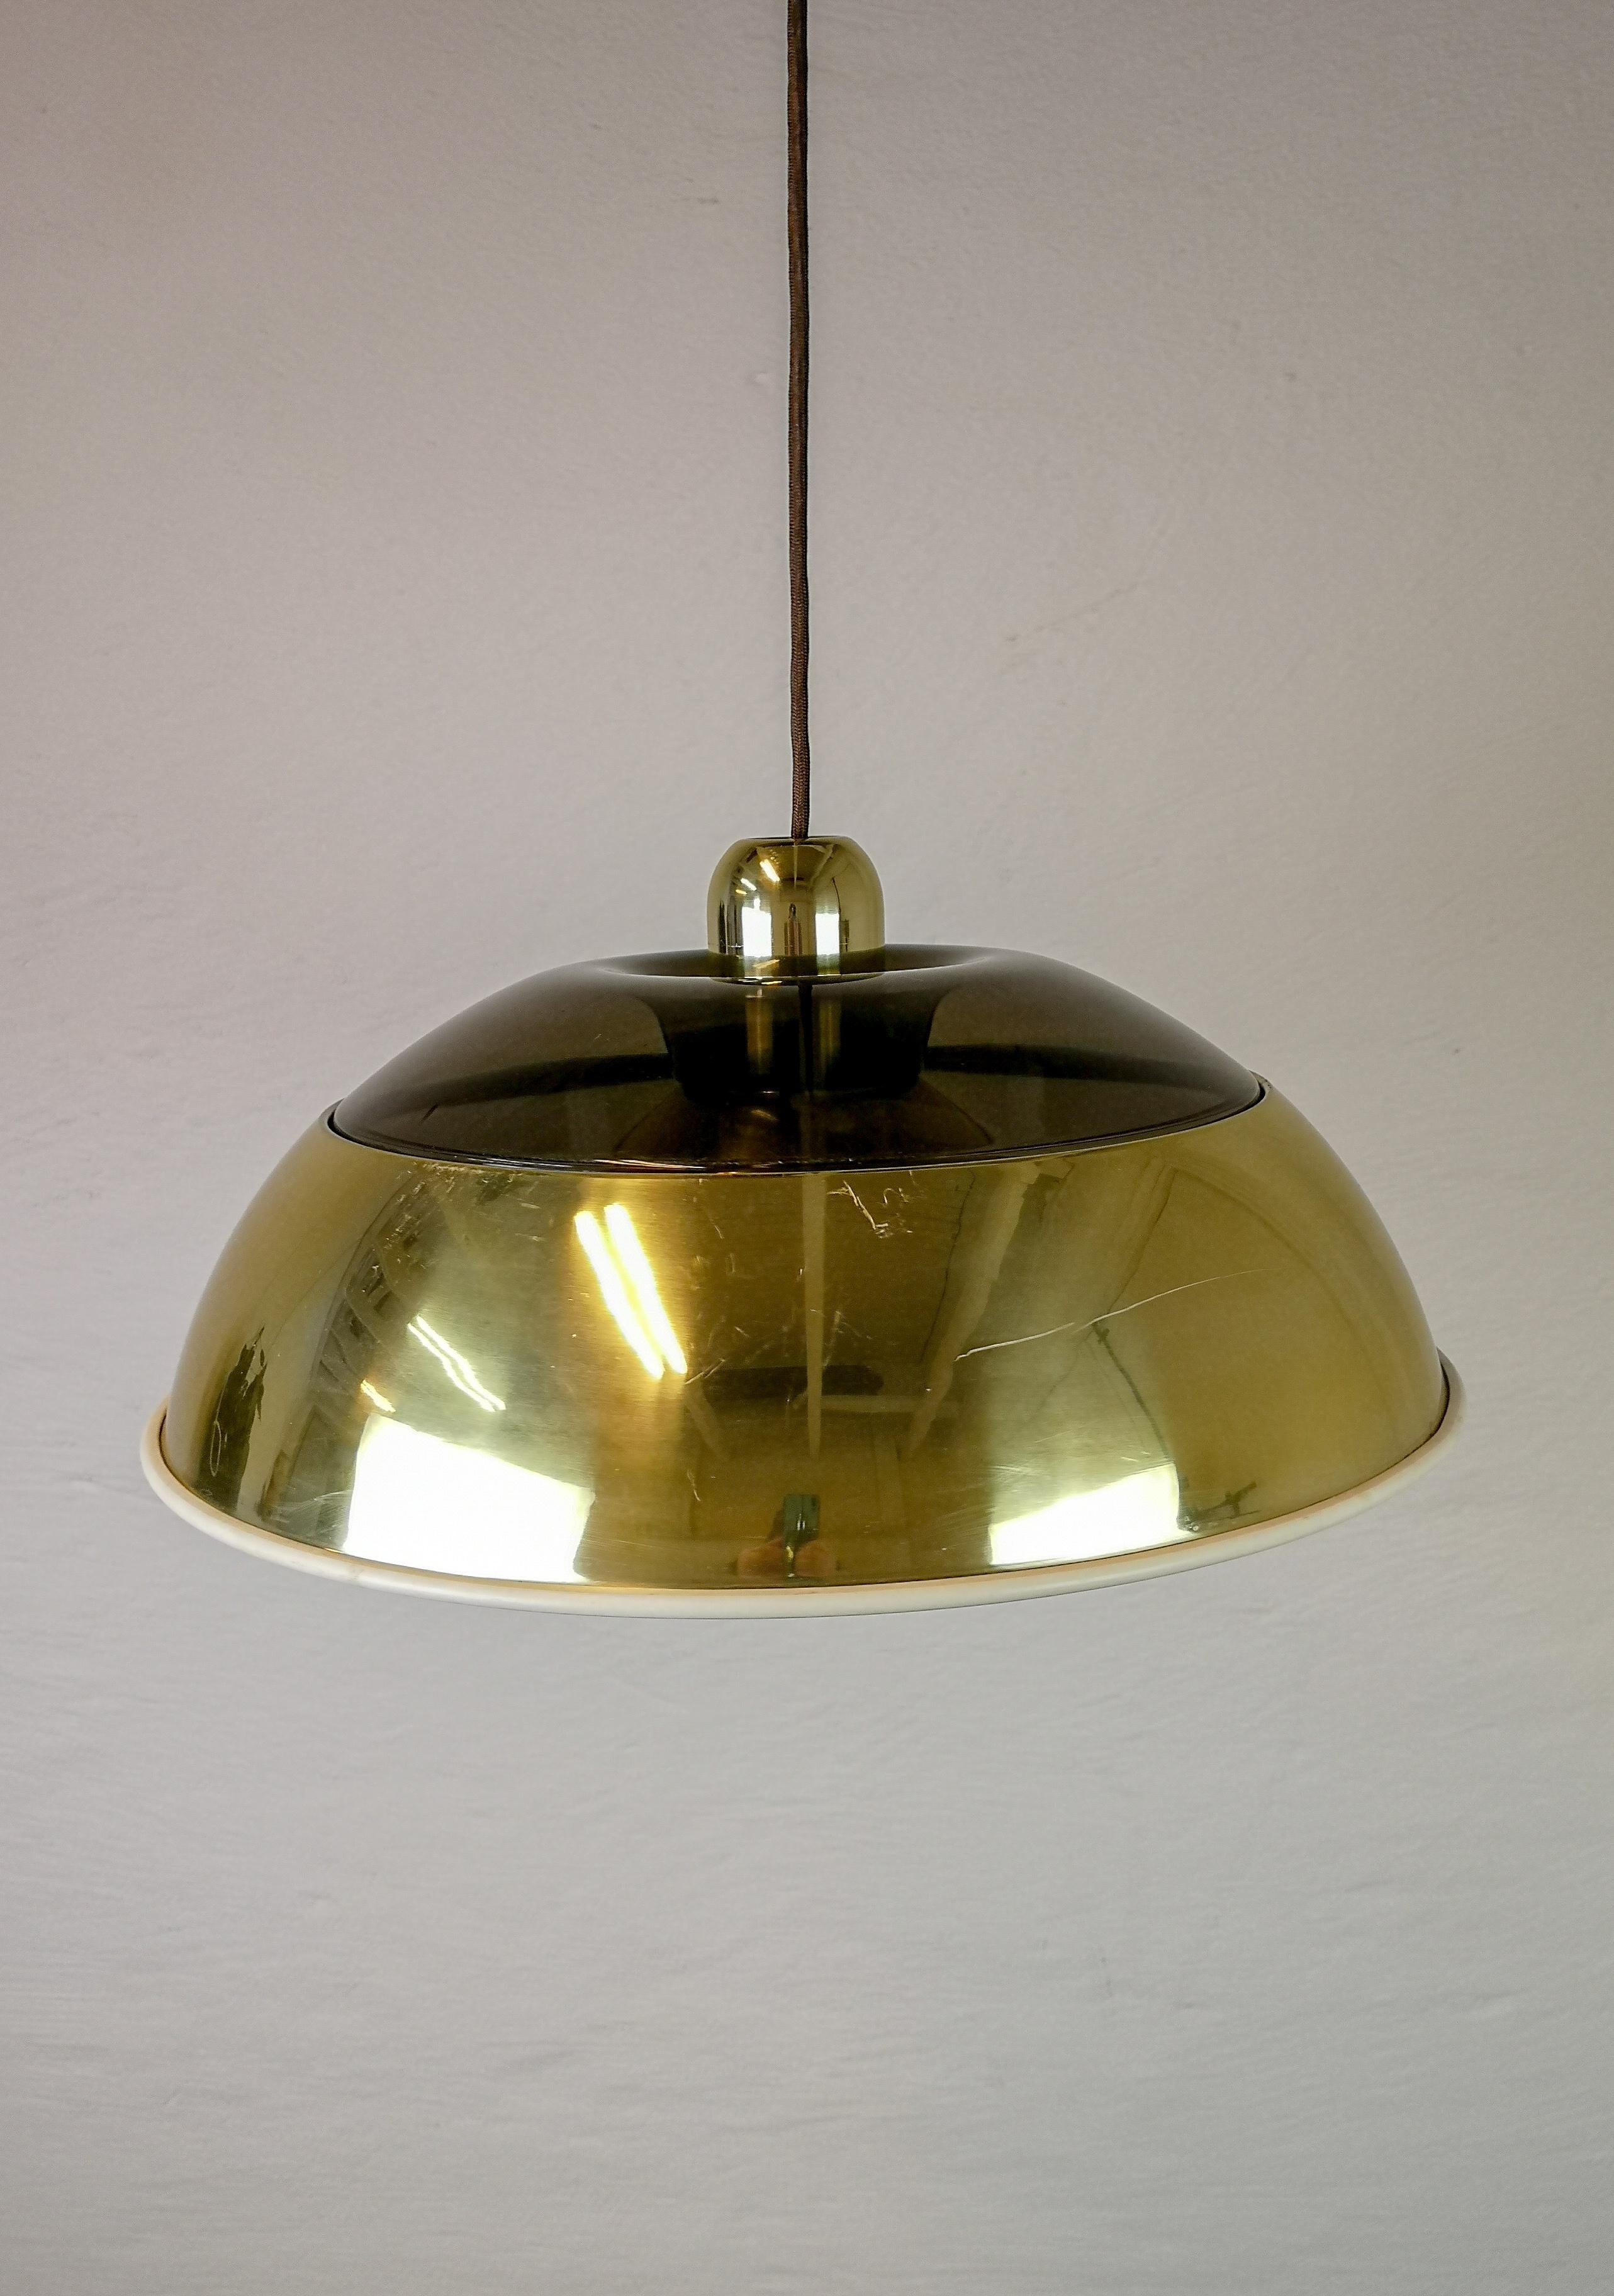 This large ceiling lamp was produced in the 1970s for Fagerhults Belysning, Sweden. The top is made out of dark shade plastic and the lower part in gold looking metal.

Good fair working condition. Scratches on gold metal.

Measures: H 23 cm, D